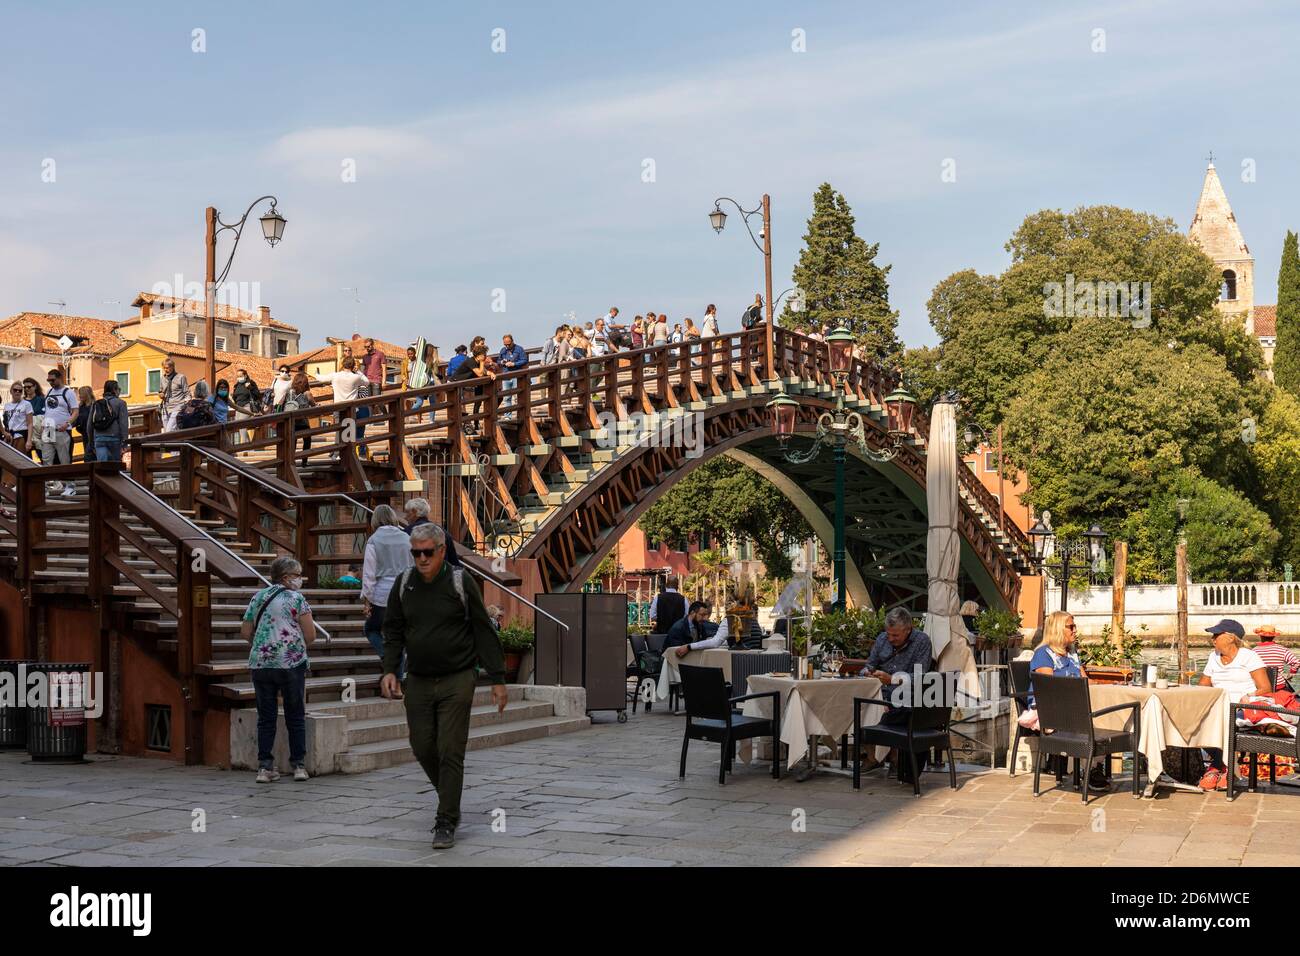 Restaurant at the base of The Ponte dell Accademia (Accademia Bridge) over the Grand Canal, San Marco, Venice, Italy Stock Photo